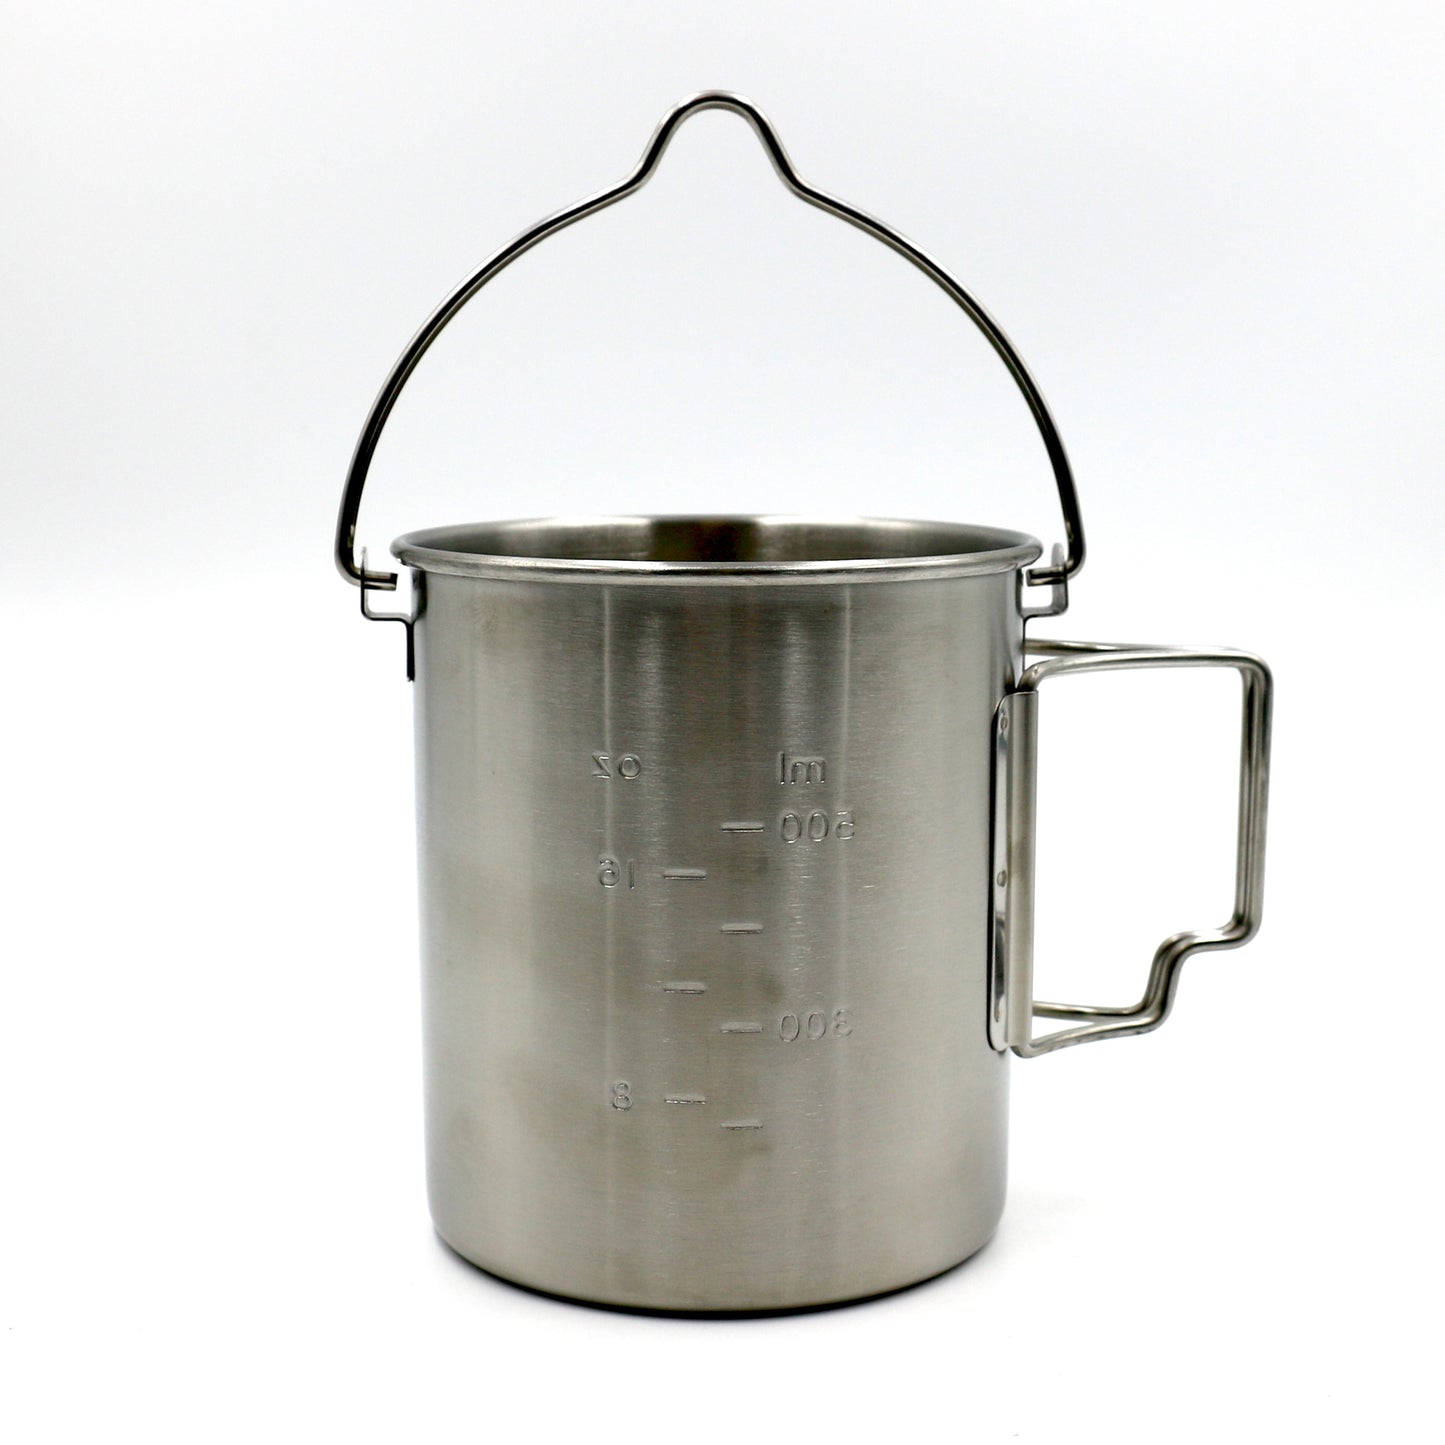 750 ml / 25oz stainless steel pot - cup